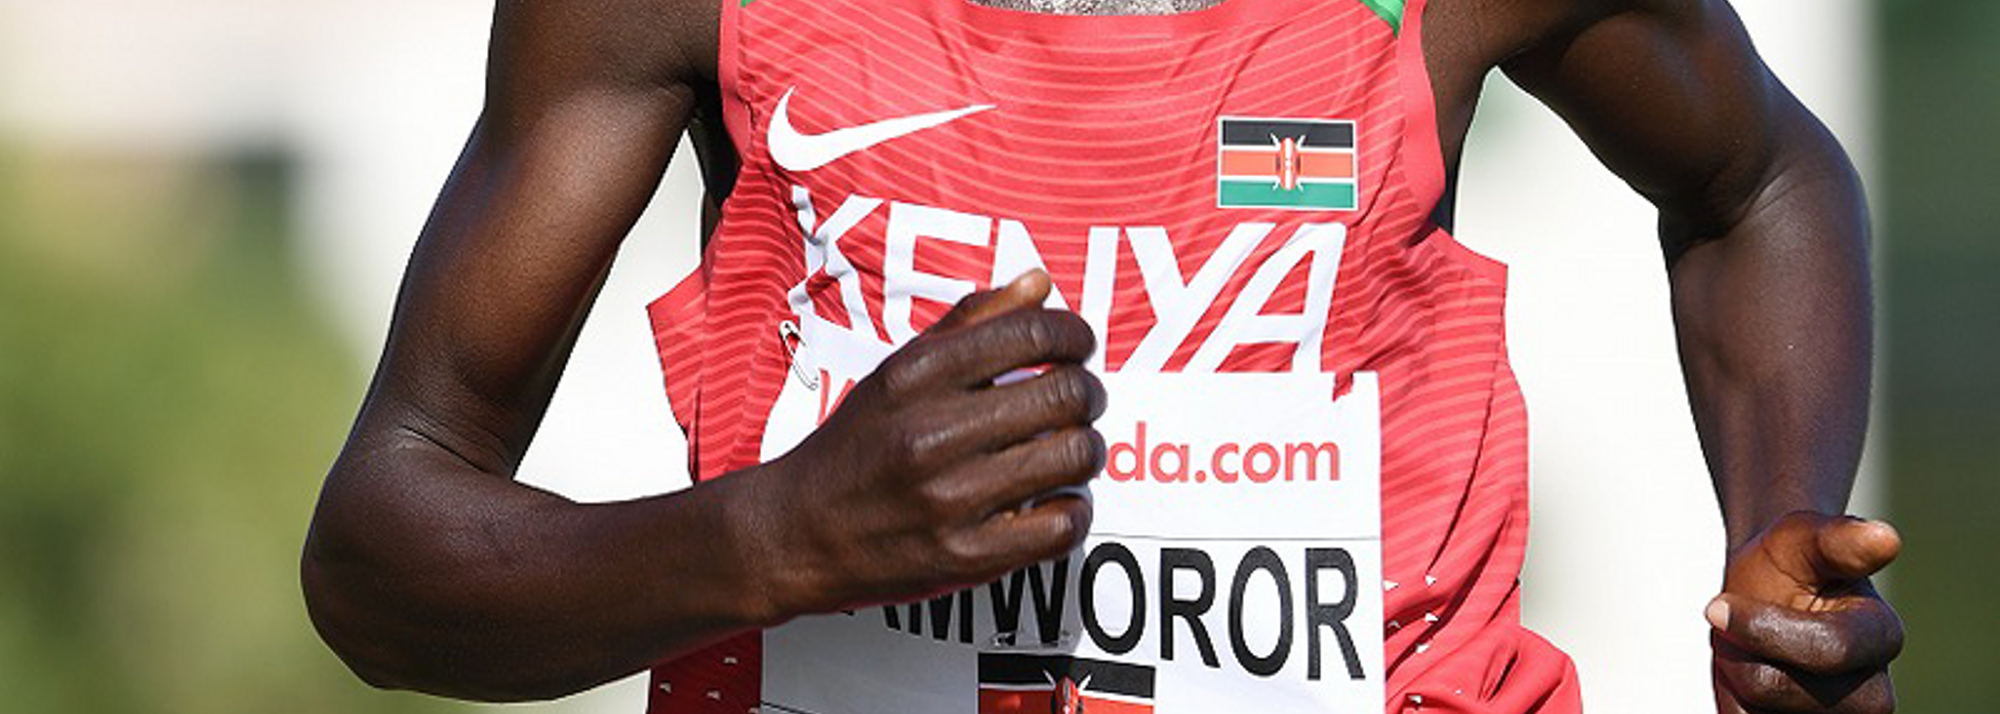 While most runners were relieved when they could finally stop at the finish of the IAAF World Cross Country Championships Kampala 2017, Kenya’s Geoffrey Kamworor crossed the line and continued running until he reached his coach.